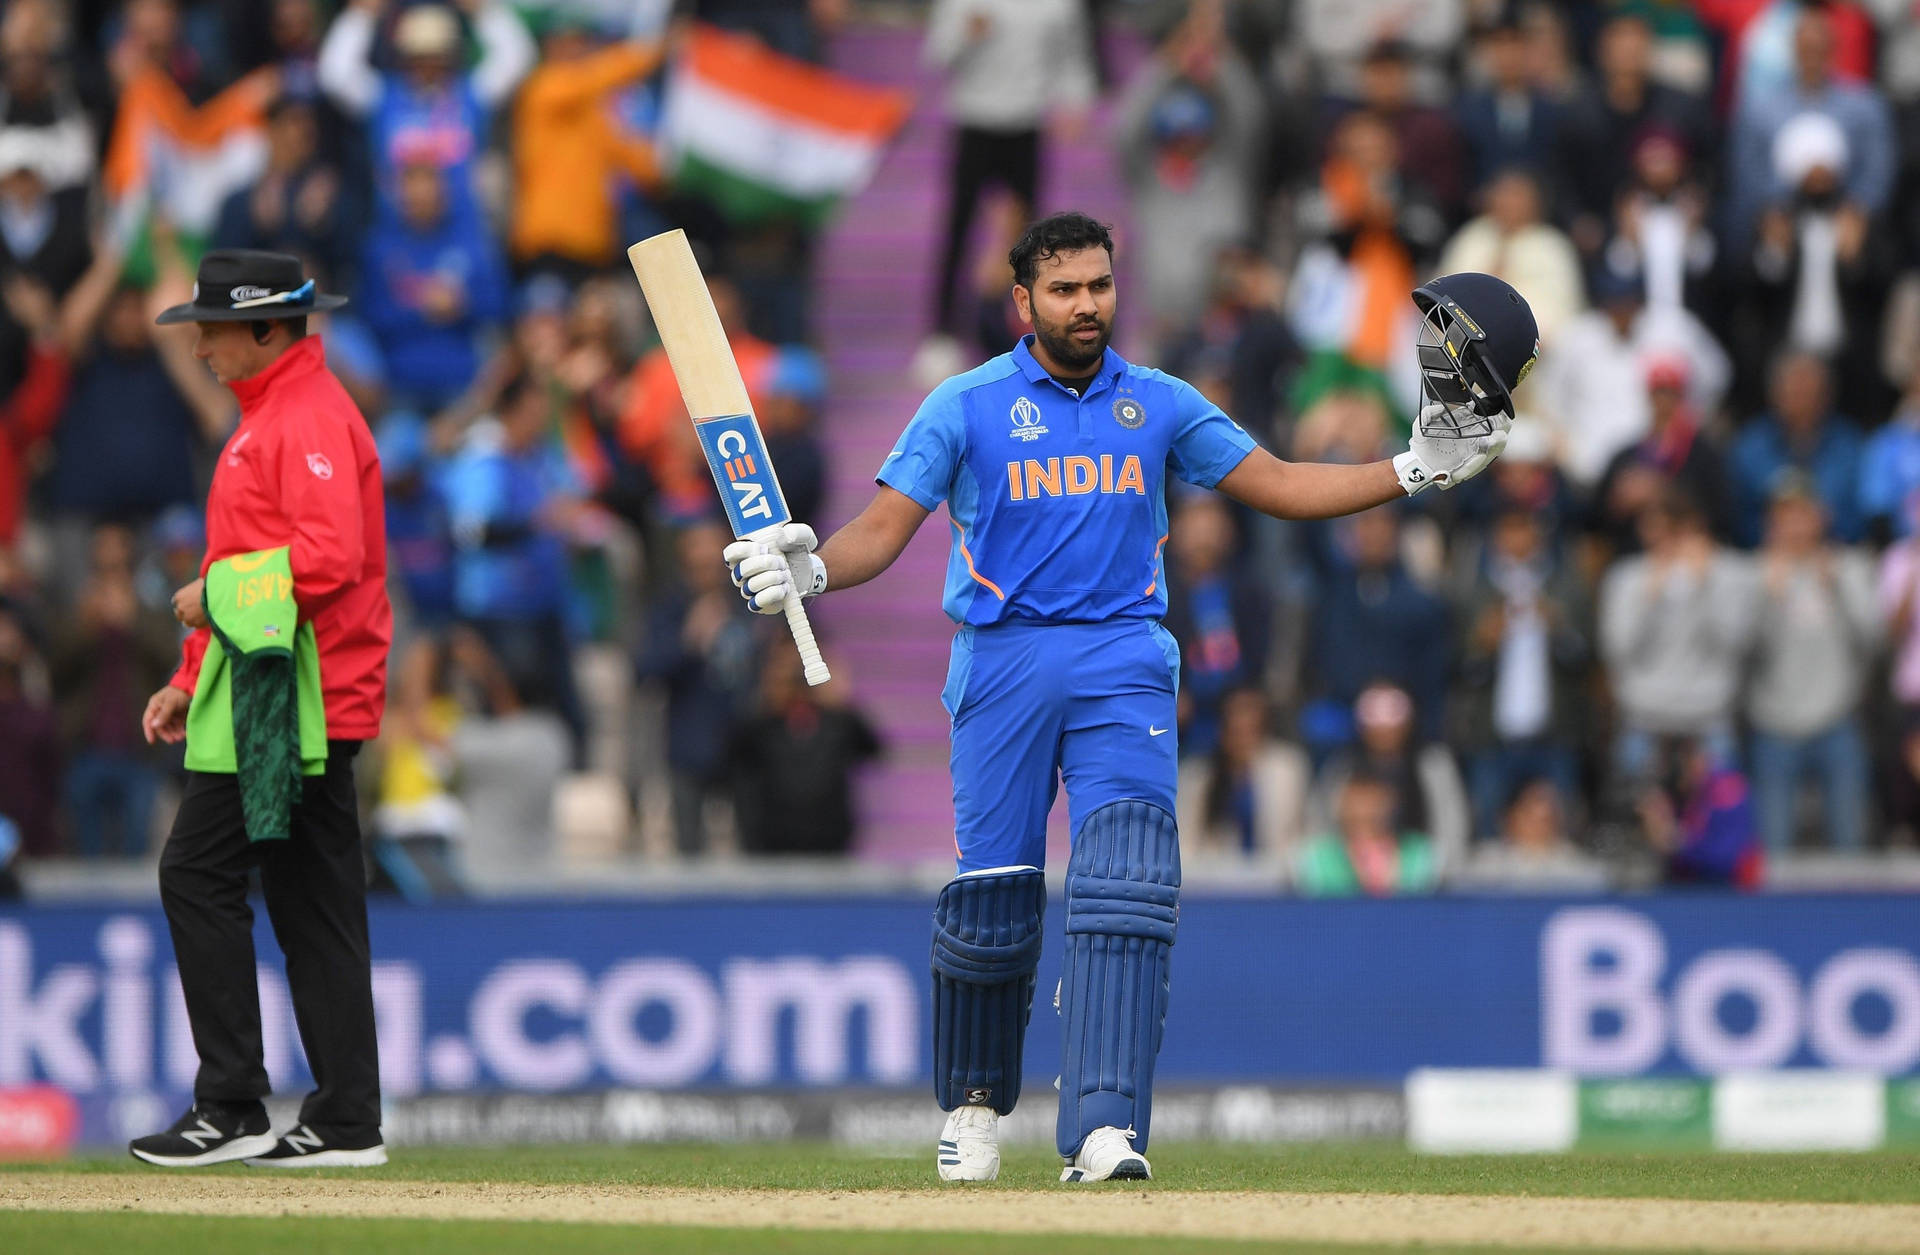 Download Rohit Sharma On The Field Wallpaper